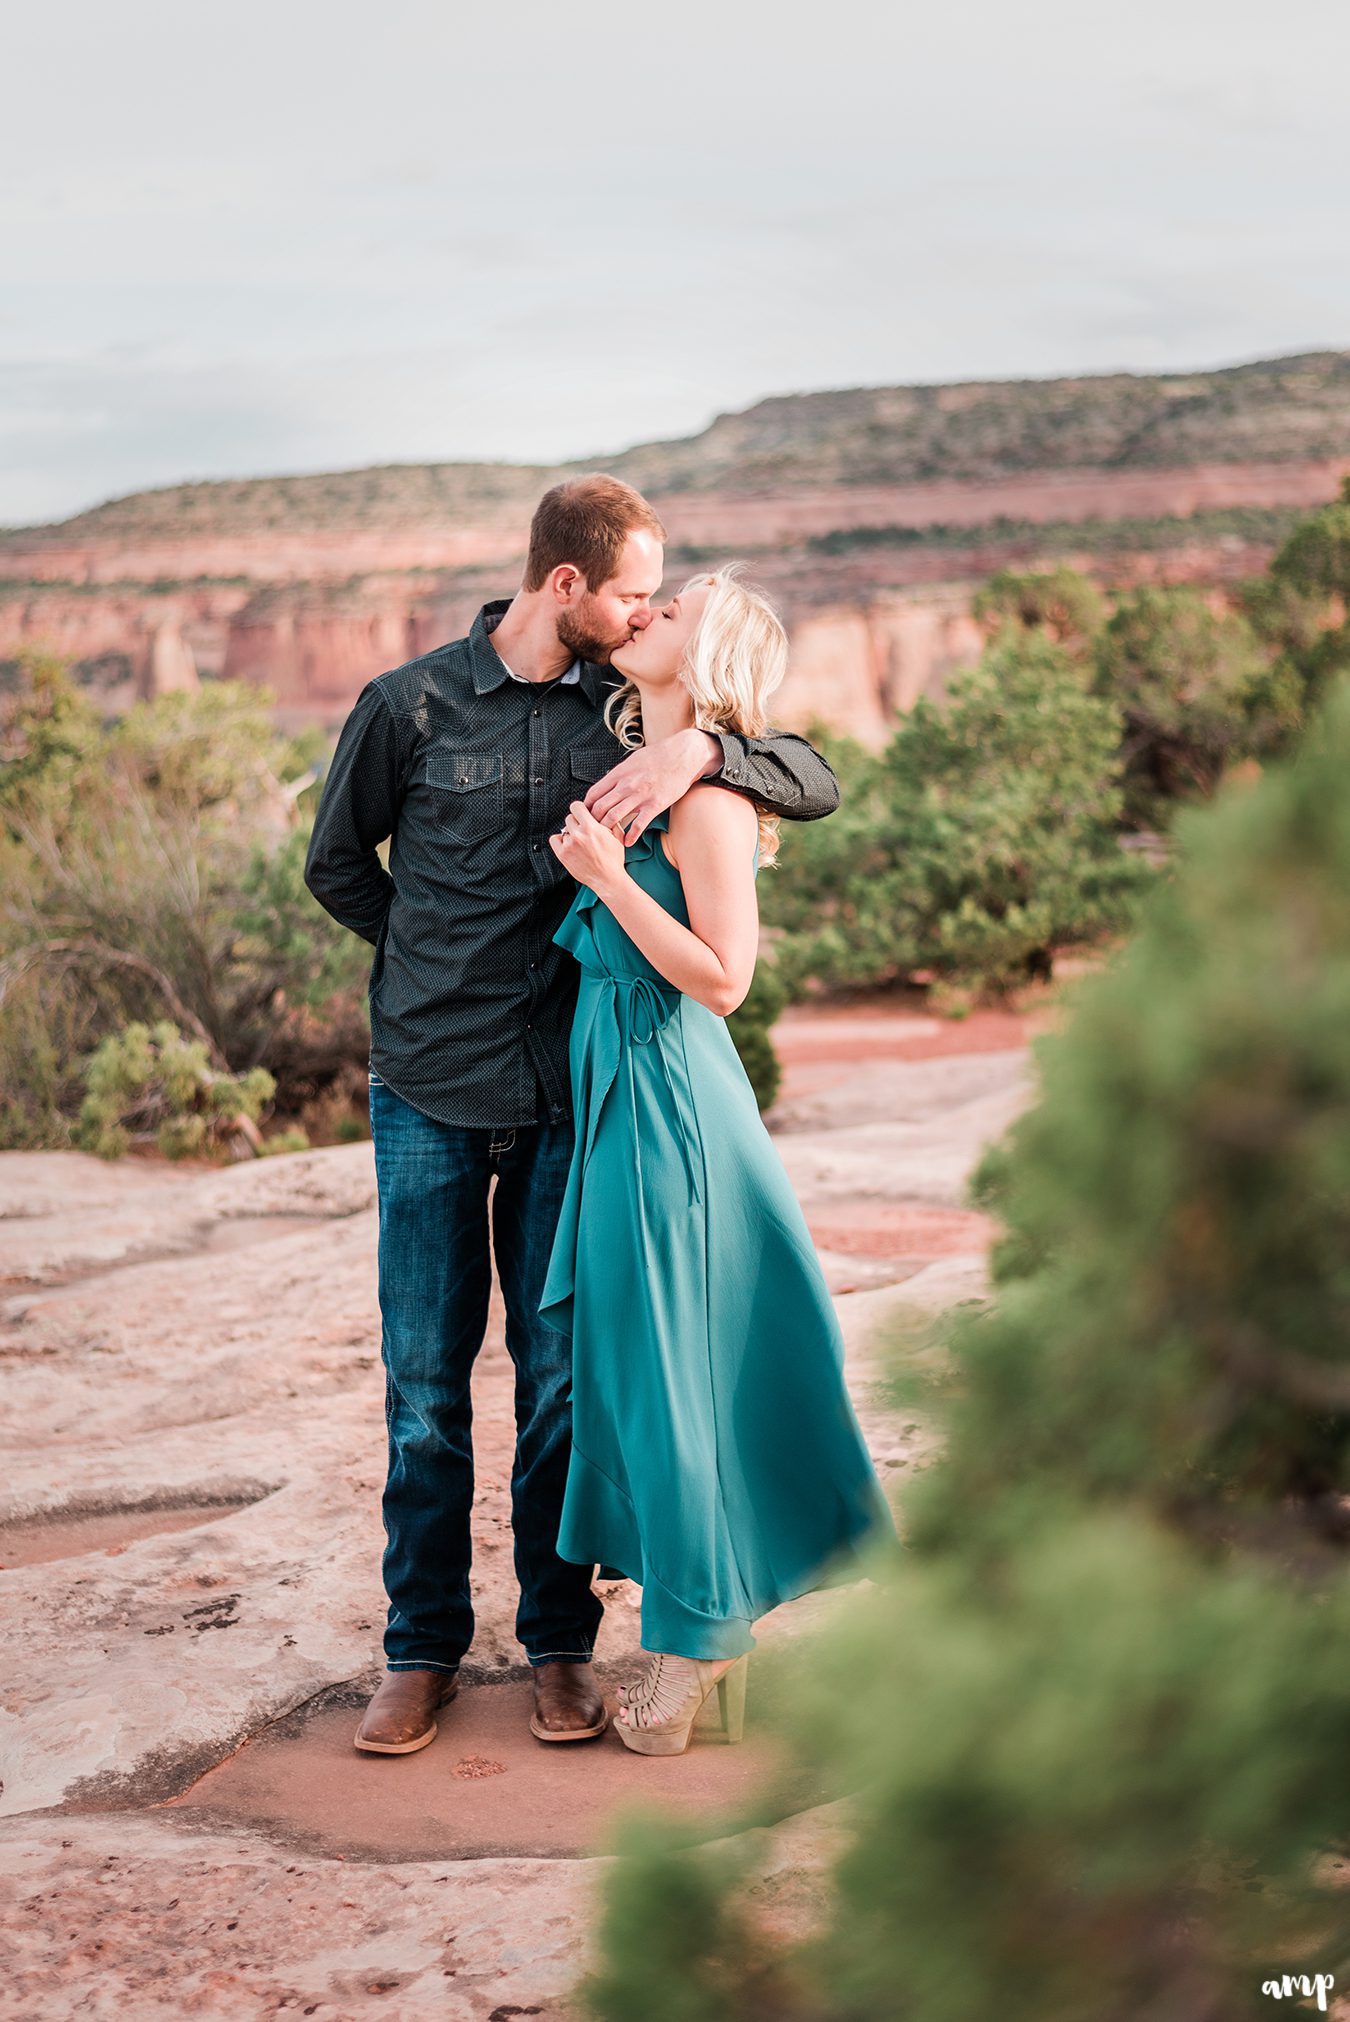 Dylan and Lexi share a kiss on the Colorado National Monument for their engagement photos